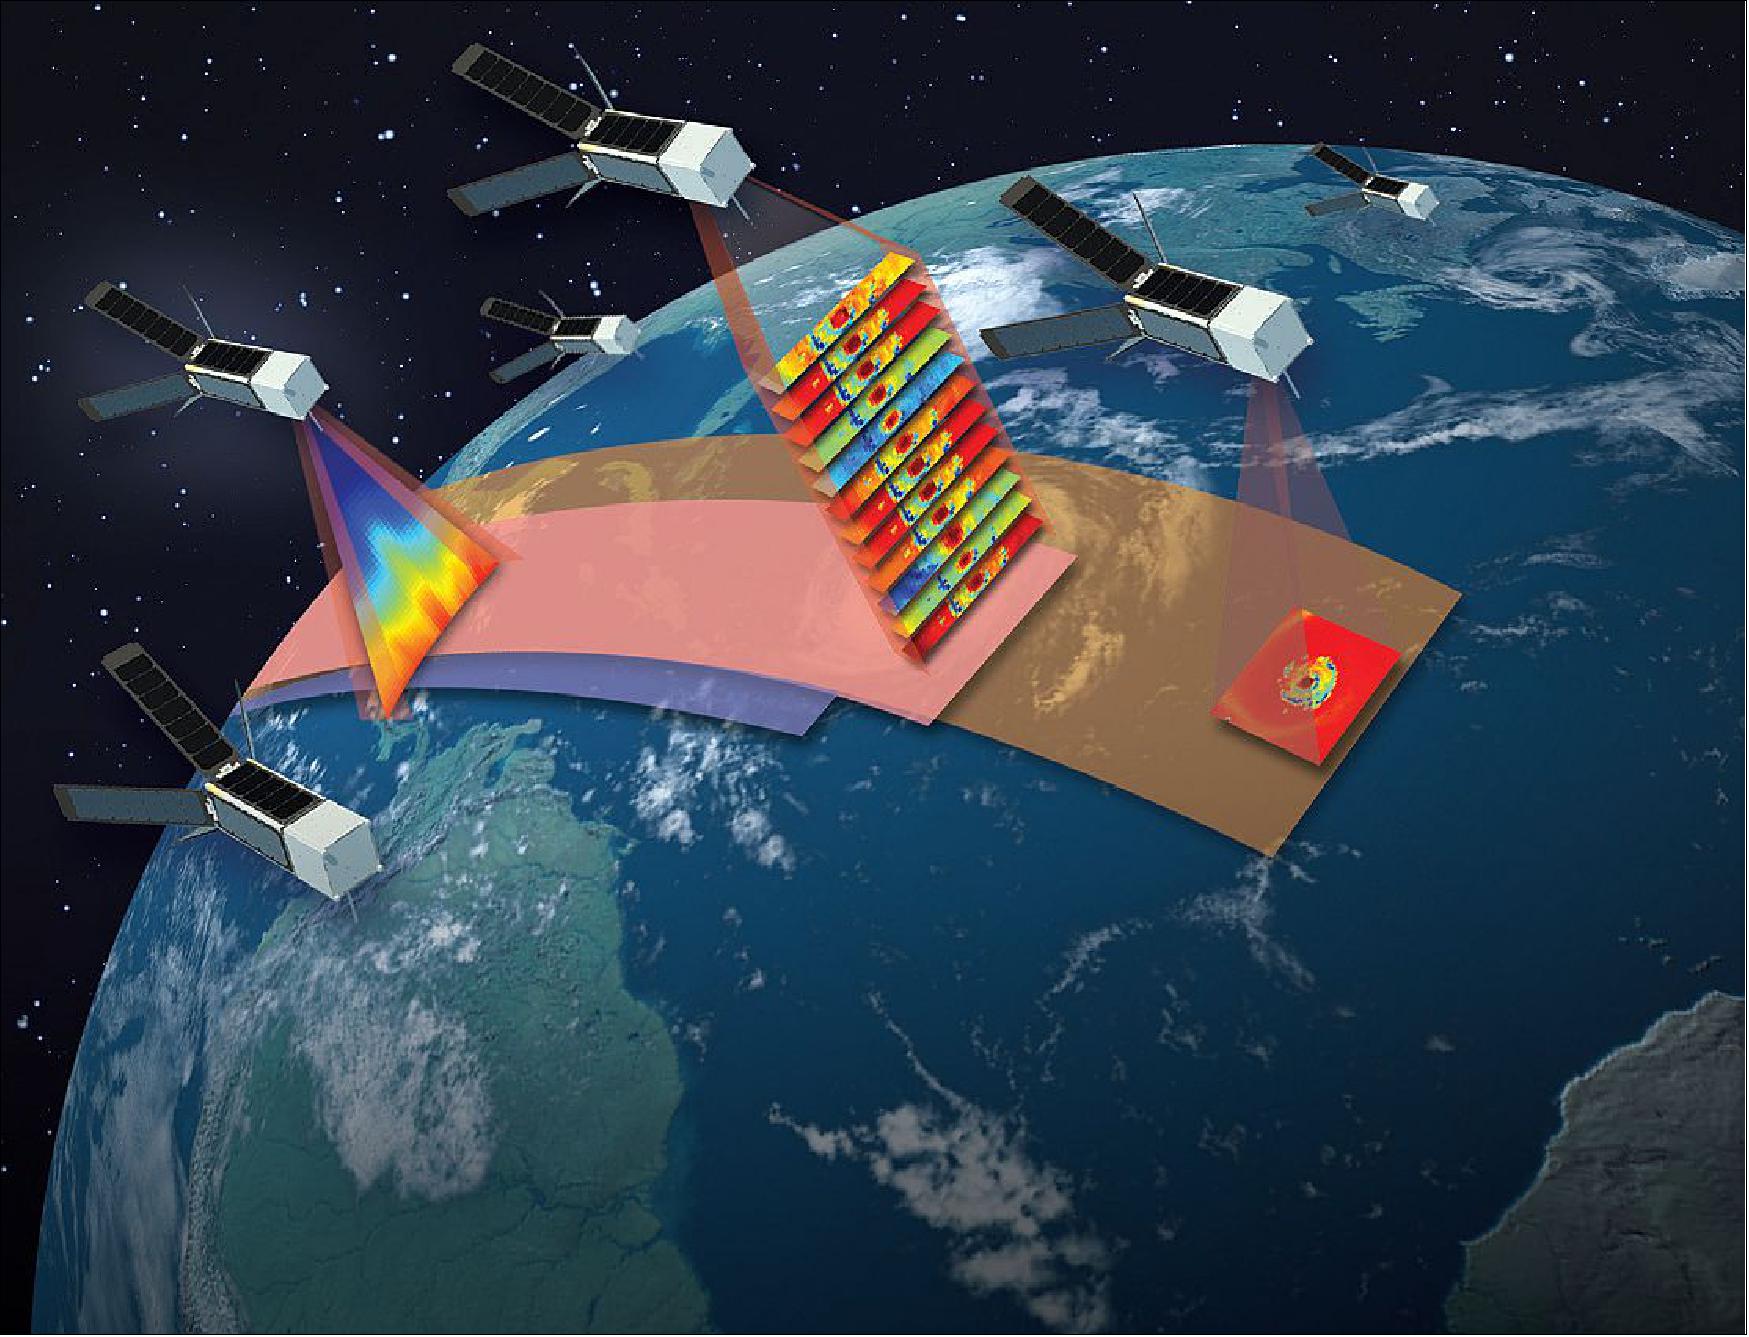 Figure 2: A constellation of identical 3U CubeSats provide sounding (left CubeSat has a temperature profile of a simulated TC (Tropical Cyclone) from a NWP (Numerical Weather Prediction) model and 12-channel radiometric imagery (center CubeSat has simulated radiances from NWP model and radiative transfer model and the near right CubeSat has a single channel radiance image of a TC) with 30-minute median revisit rate to meet most PATH requirements (image credit: MIT/LL, NASA, Ref. 5)